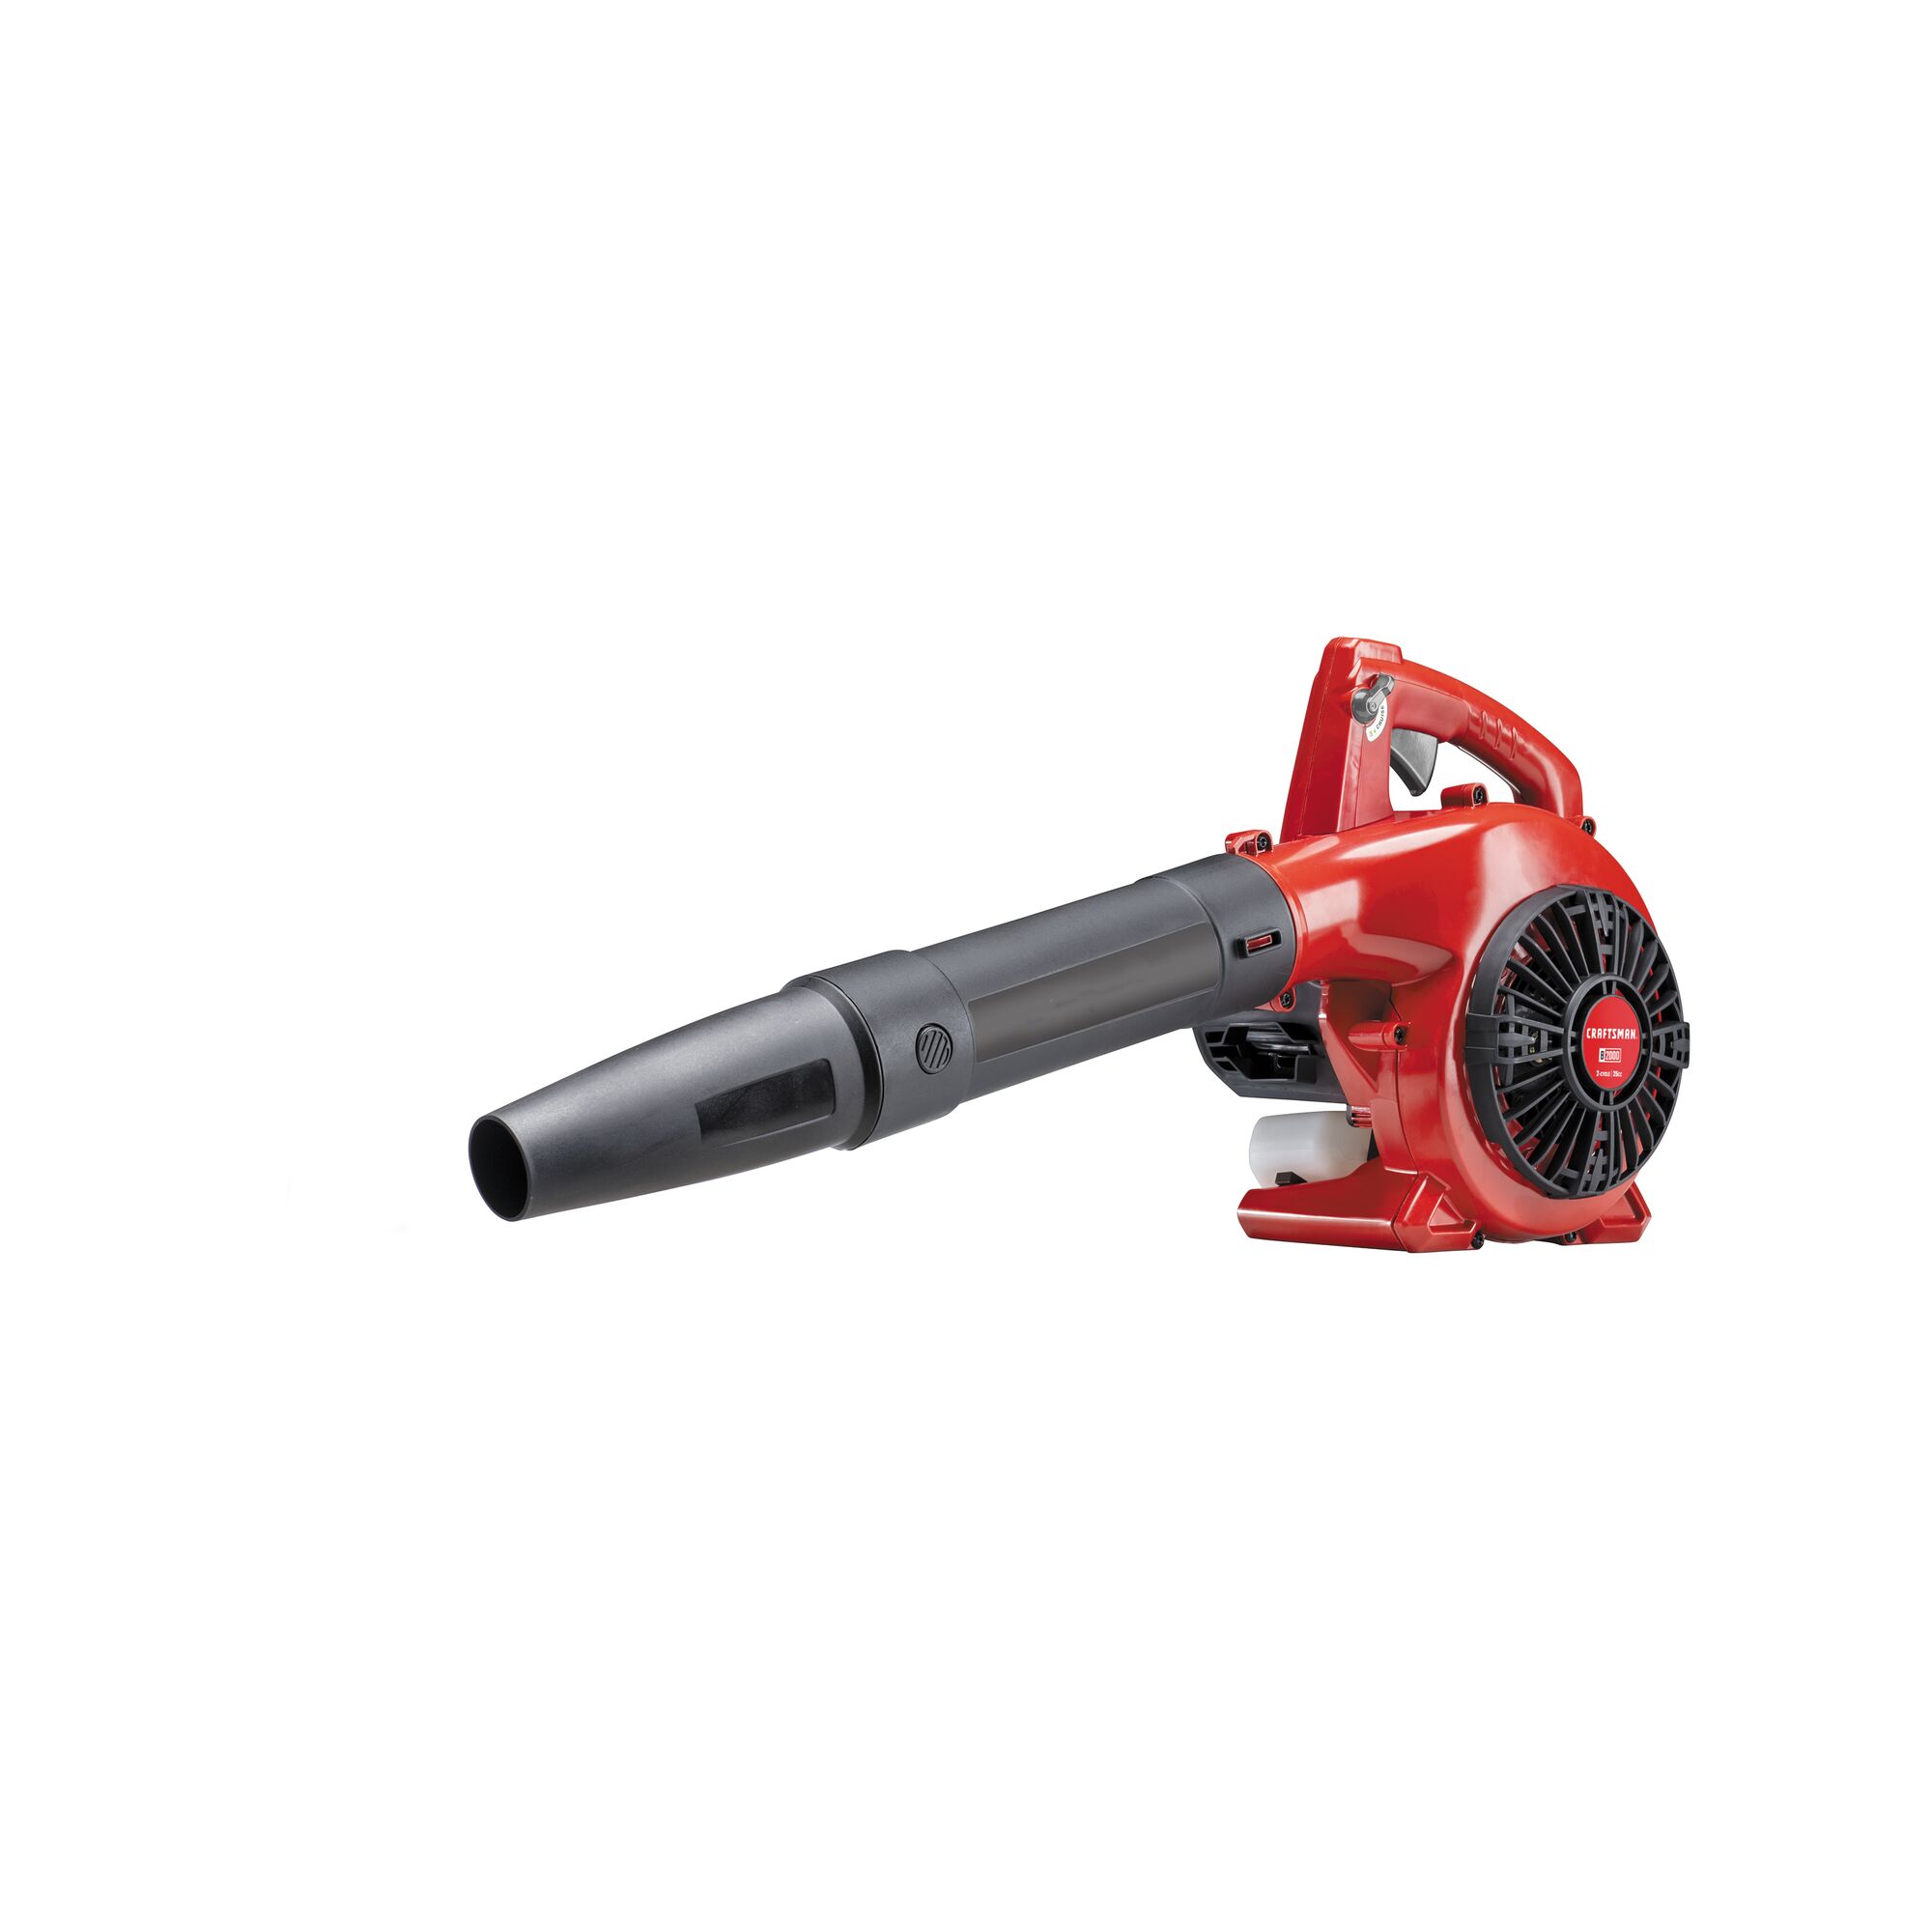 Right profile of 25 C C 2 cycle gas leaf blower.